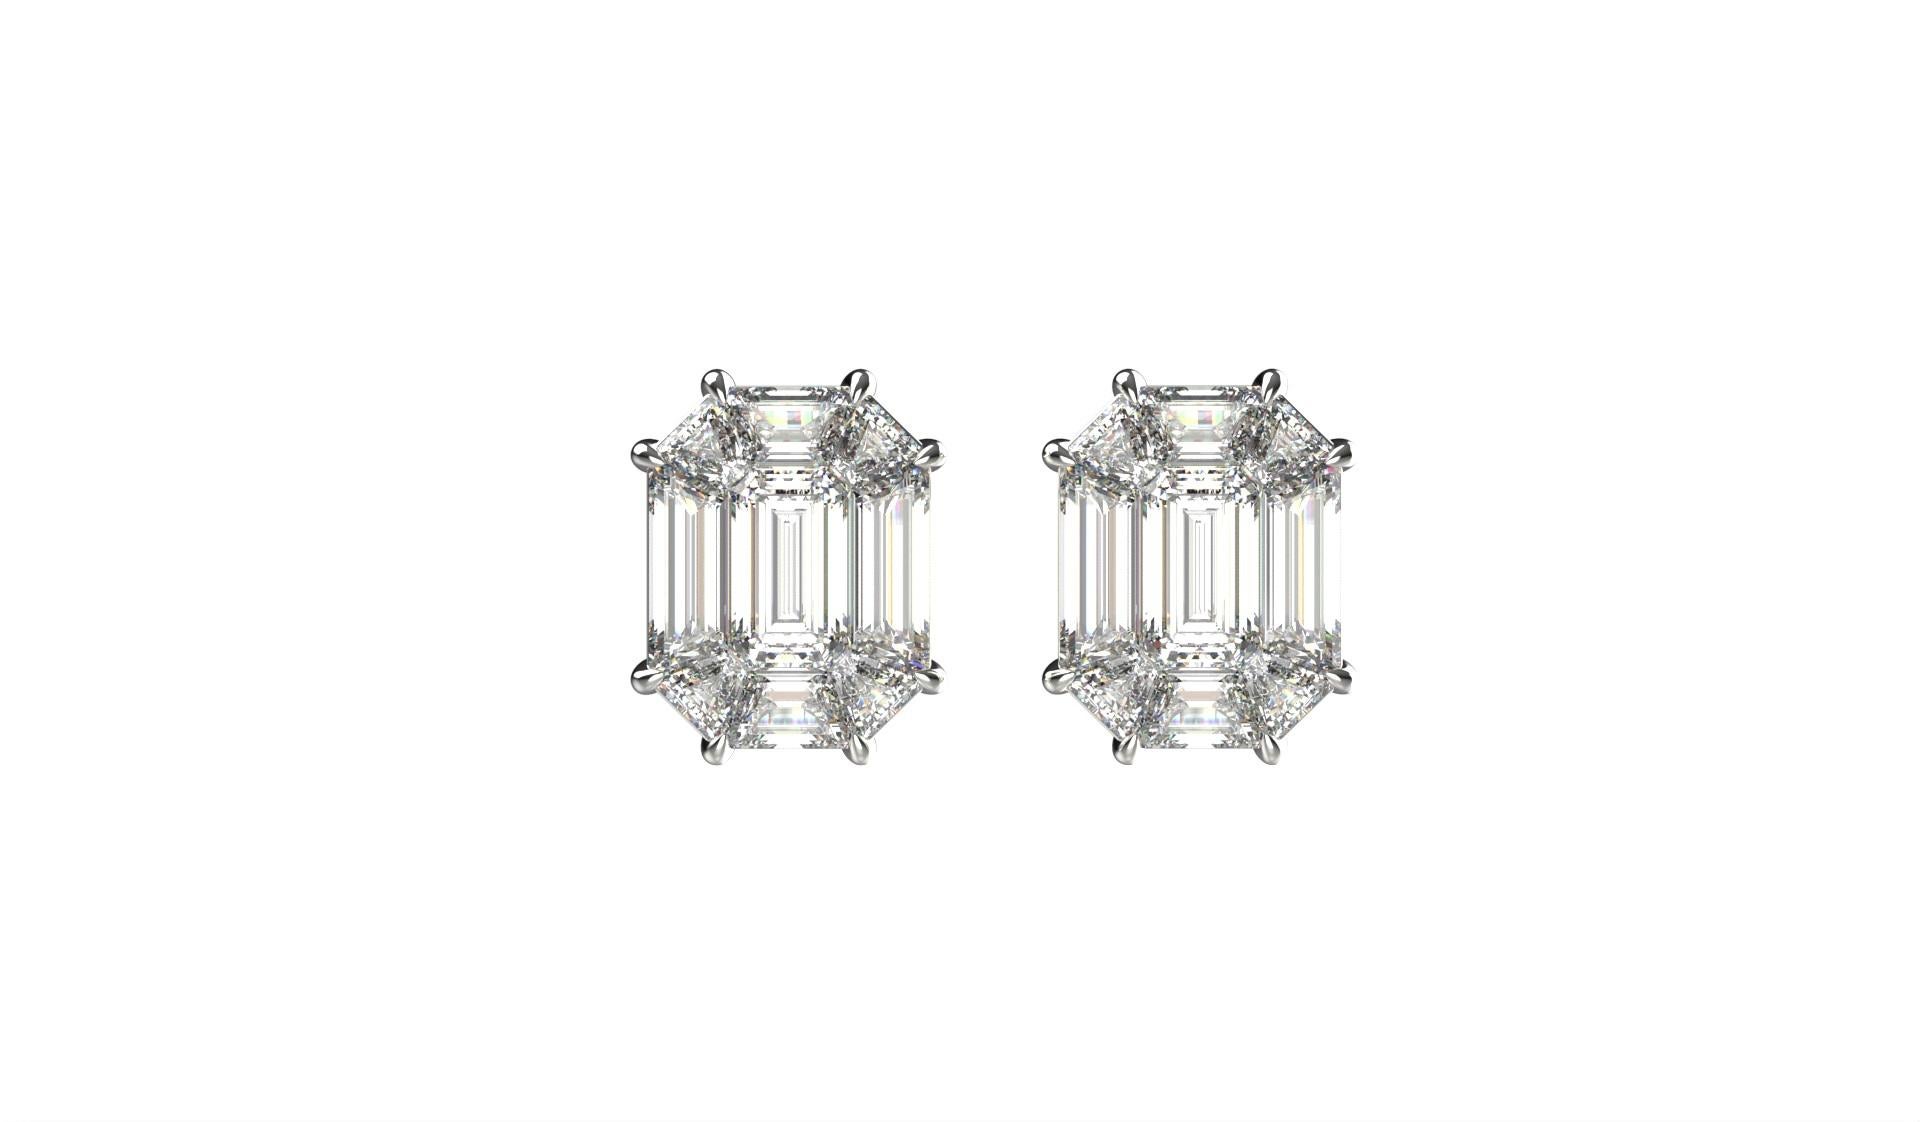 Alex Kou Invizible Setting Emerald Shape Diamond Stud Earrings
invisible setting 9 pie cut diamonds 

Selection, sorting and cutting of diamonds is made in Israel
Stud earrings are made to order
It will take 3-4 weeks to produce

total white